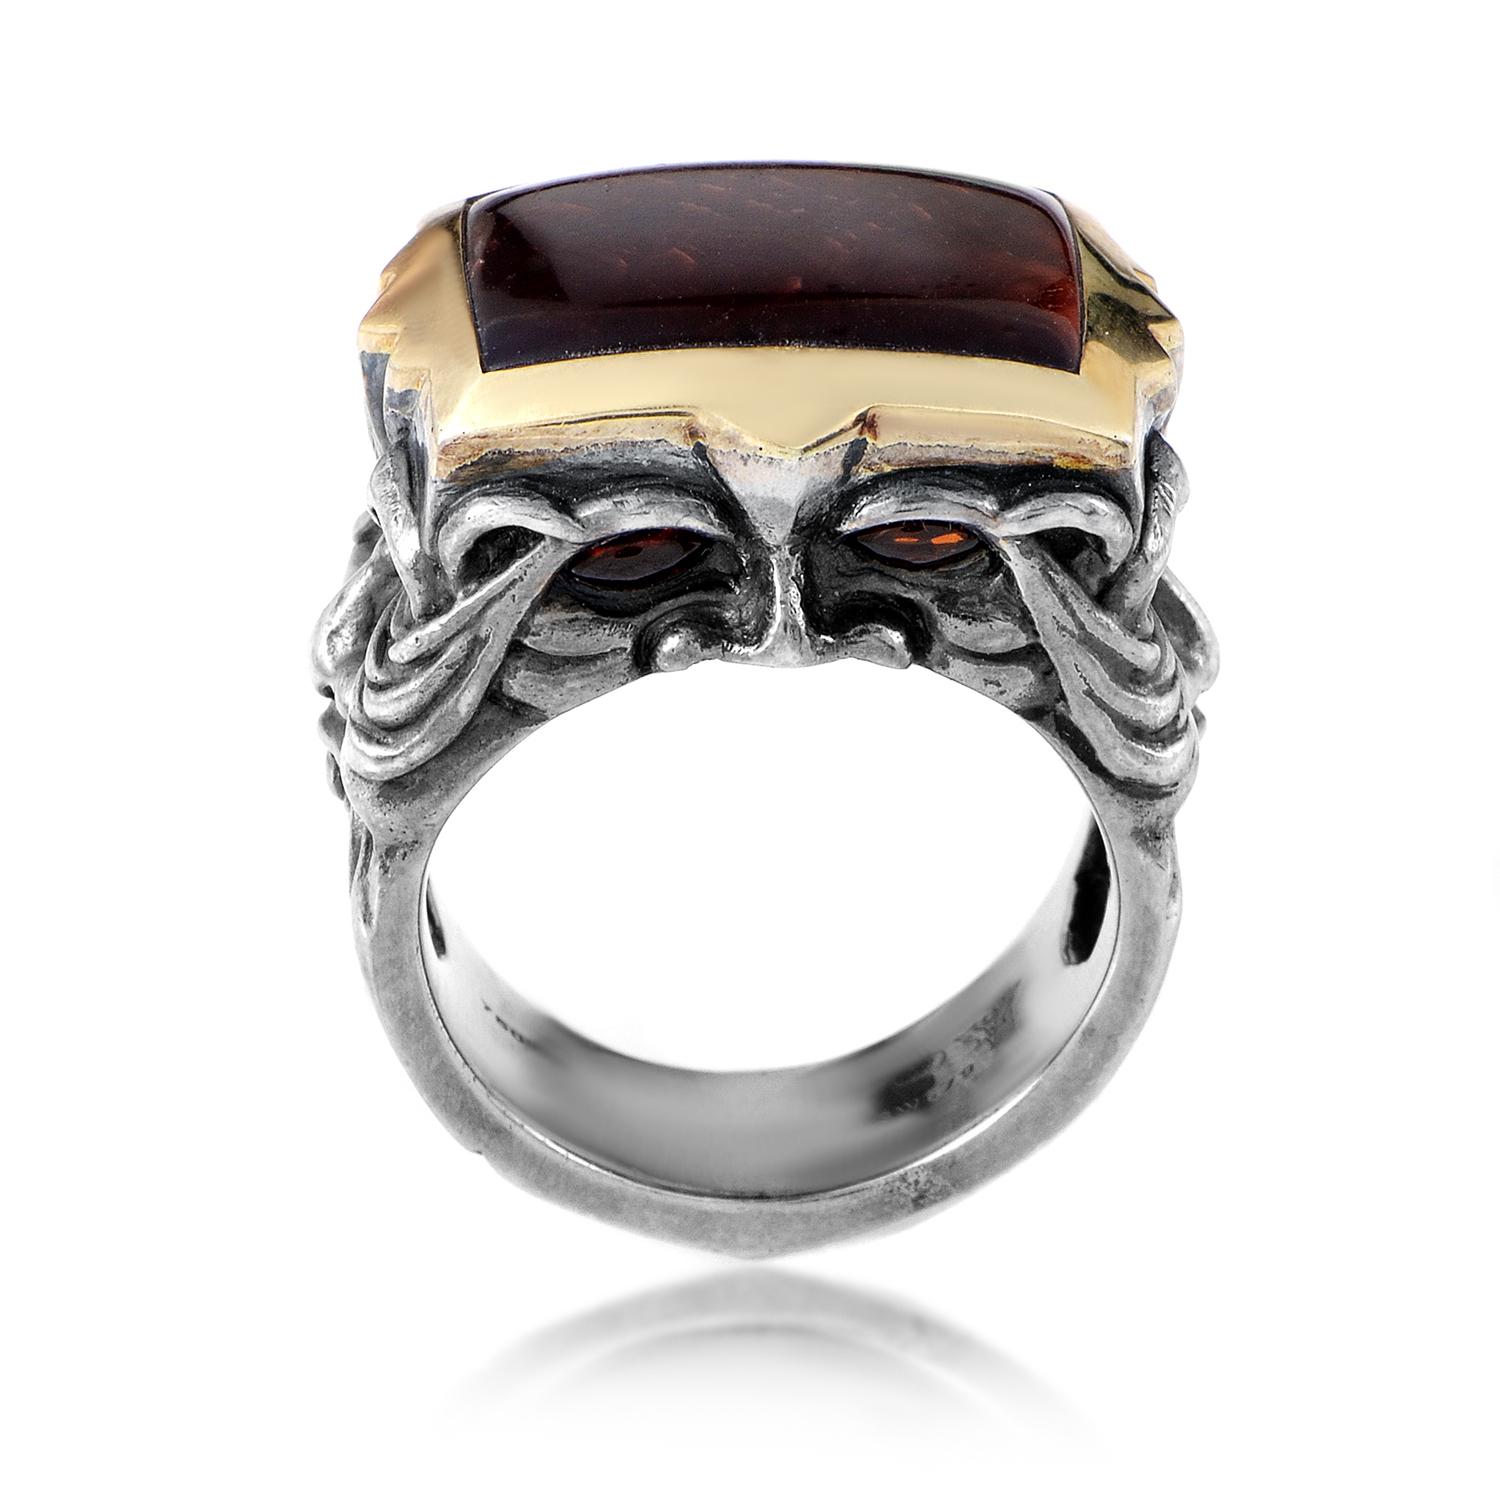 The appealing bull's eye stone lends its classy luxurious look to this remarkable piece from Stephen Webster made of oxidized silver, artistically depicting gargoyle heads. 
Band Width: 10mm
Ring Top Height: 10mm
Ring Top Dimensions: 22mm x